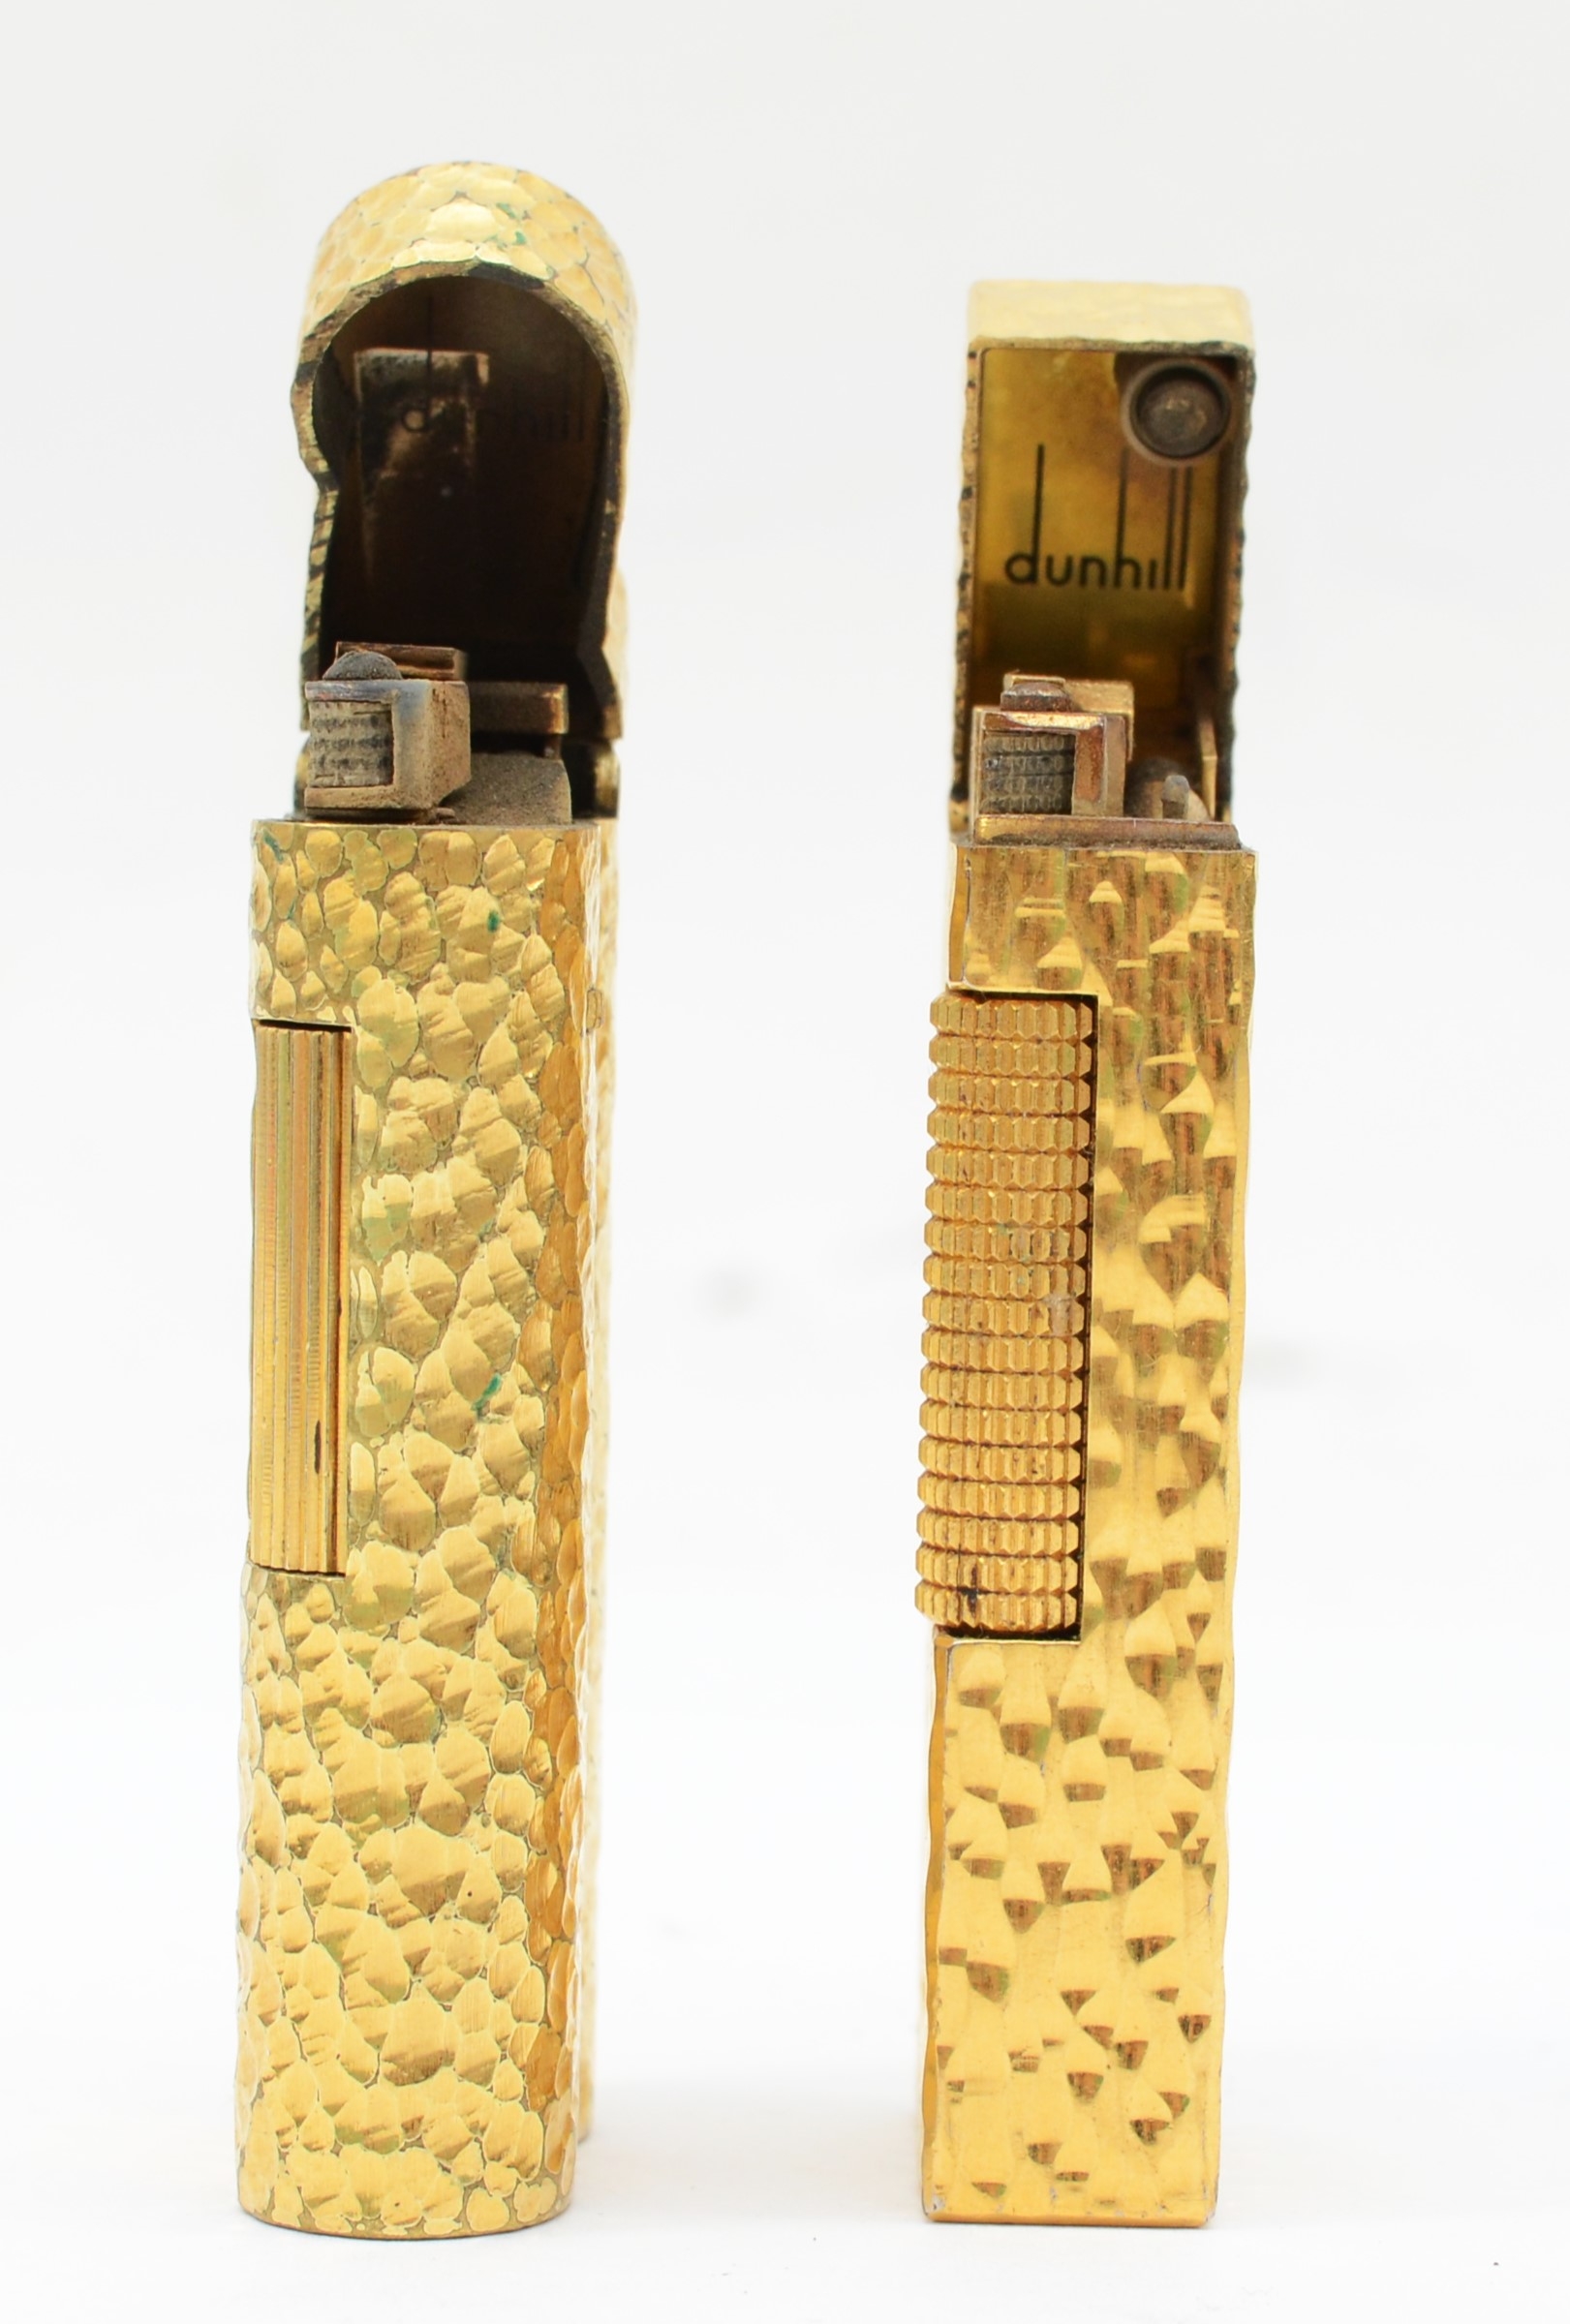 Dunhill, two textured gold plated gas lighters, 074602, 24163. - Image 2 of 4